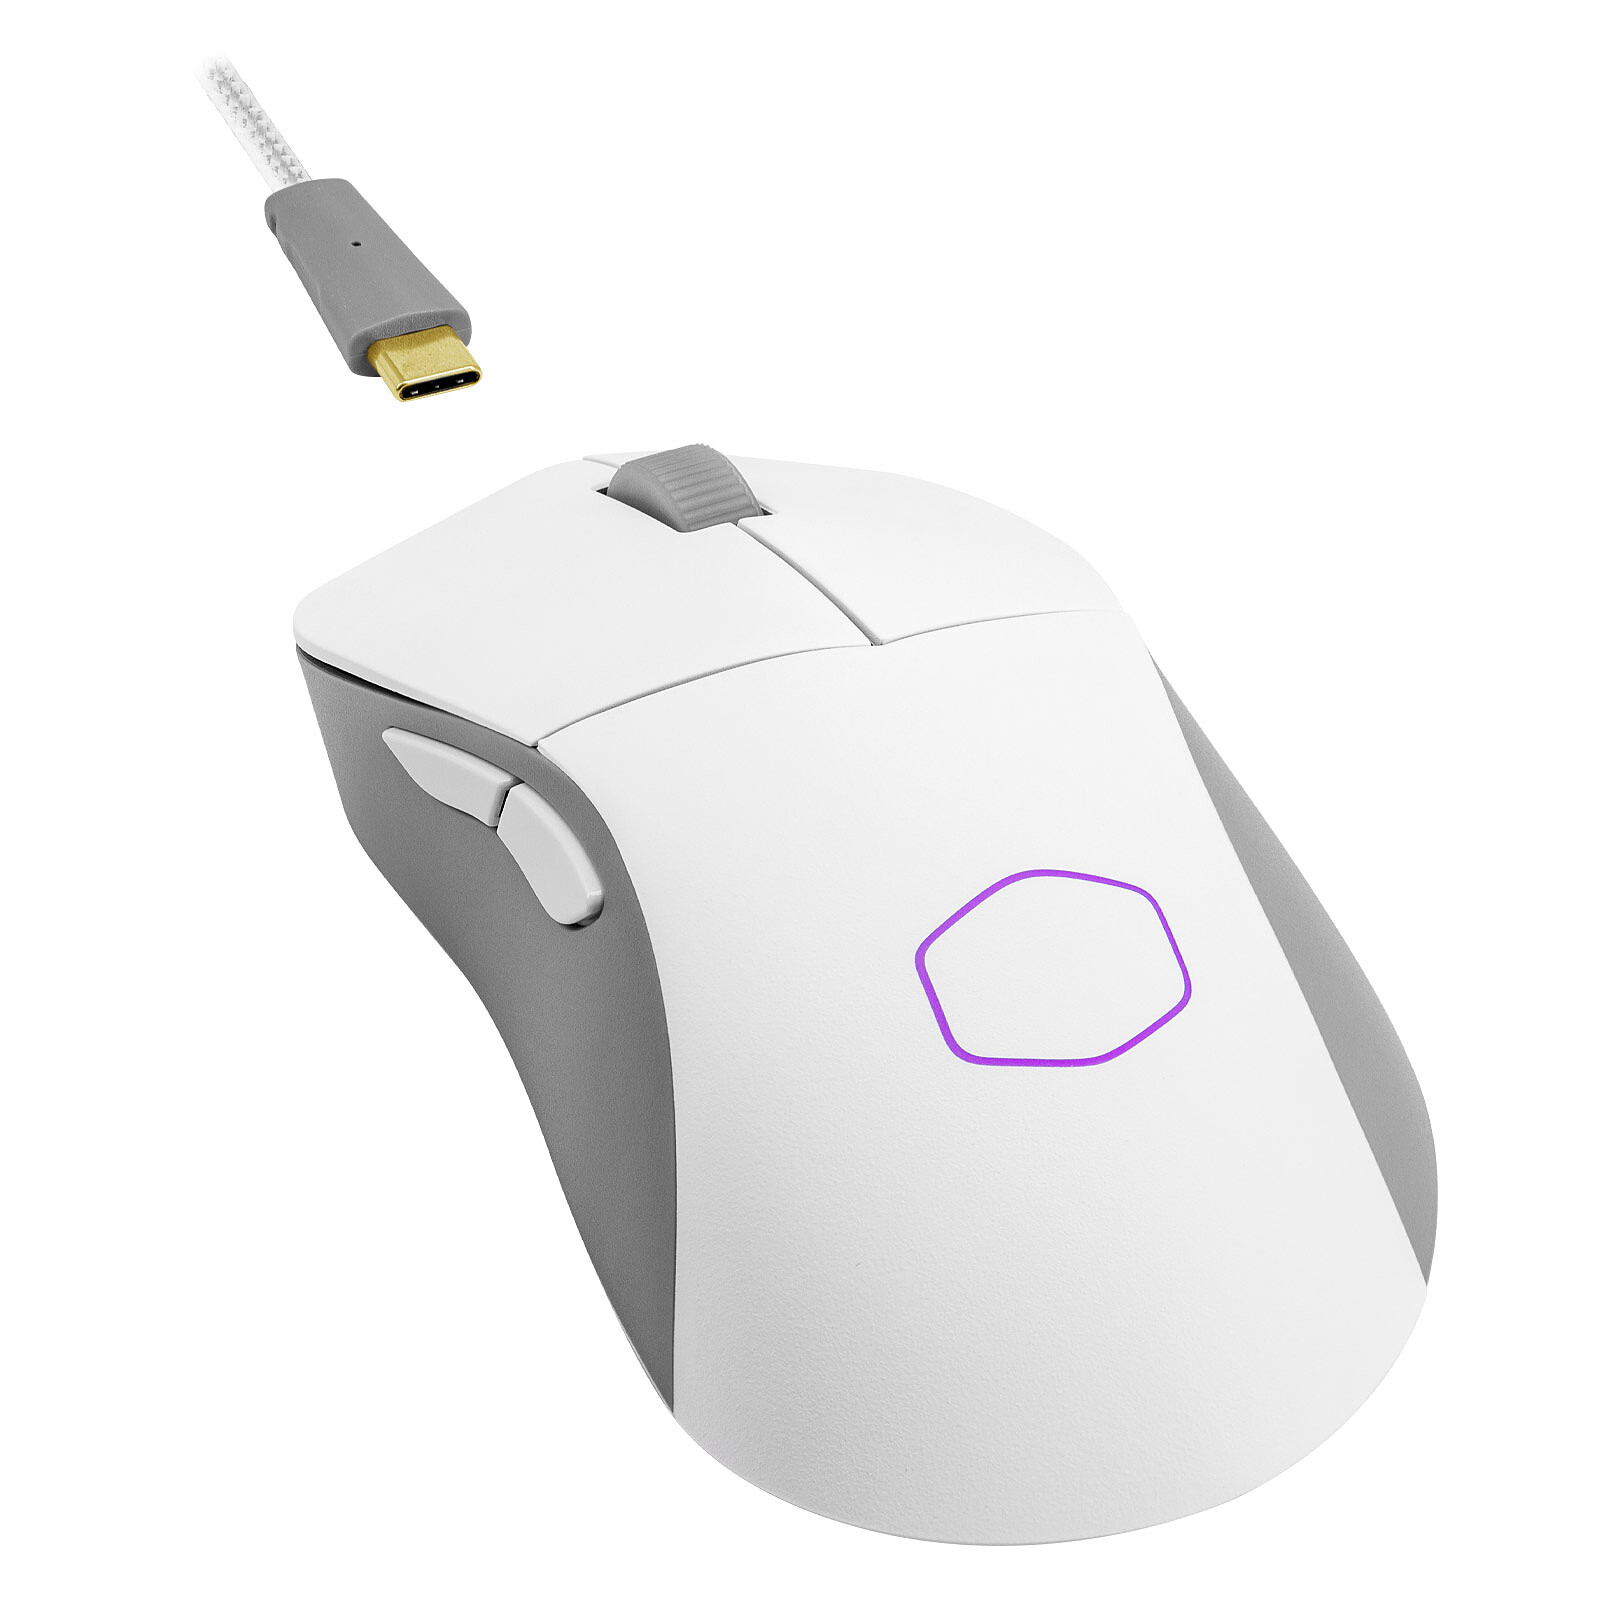 Cooler Master MM731 White - Mouse - LDLC 3-year warranty